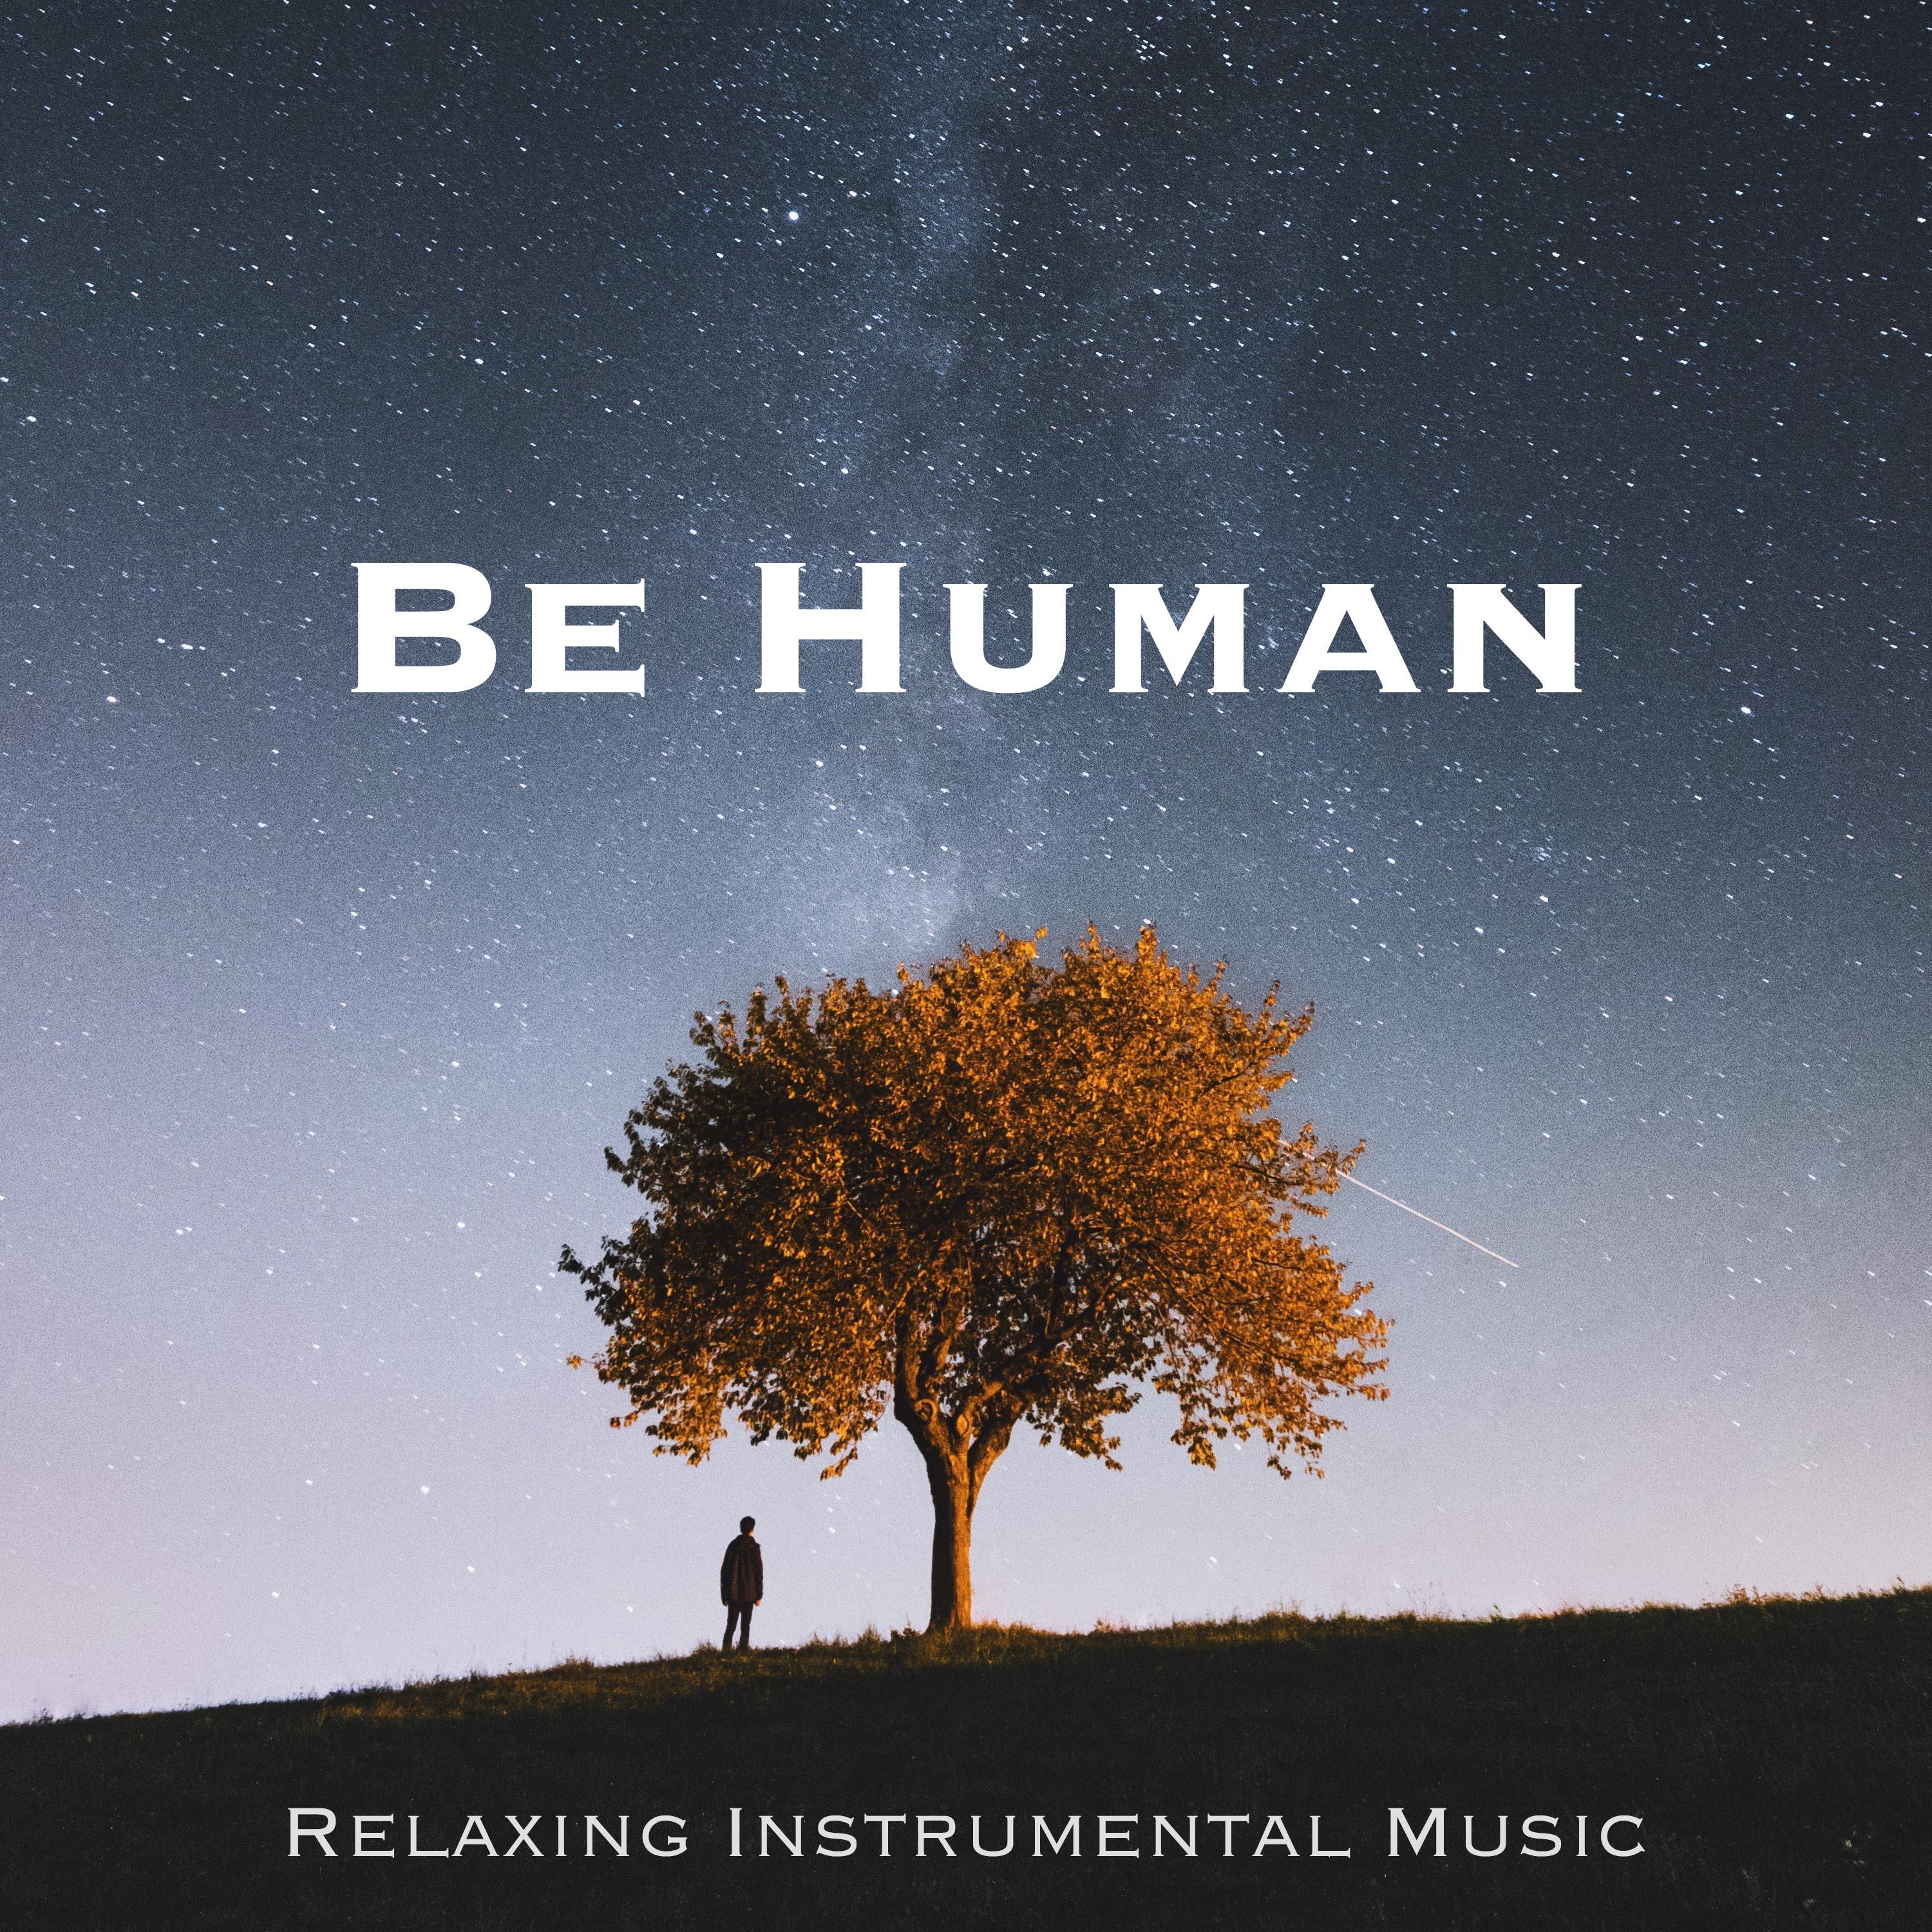 Be Human - A Prime Collection of Relaxing Instrumental Music with Nature Sounds for Happiness, Grace, Tranquility and Inner Peace